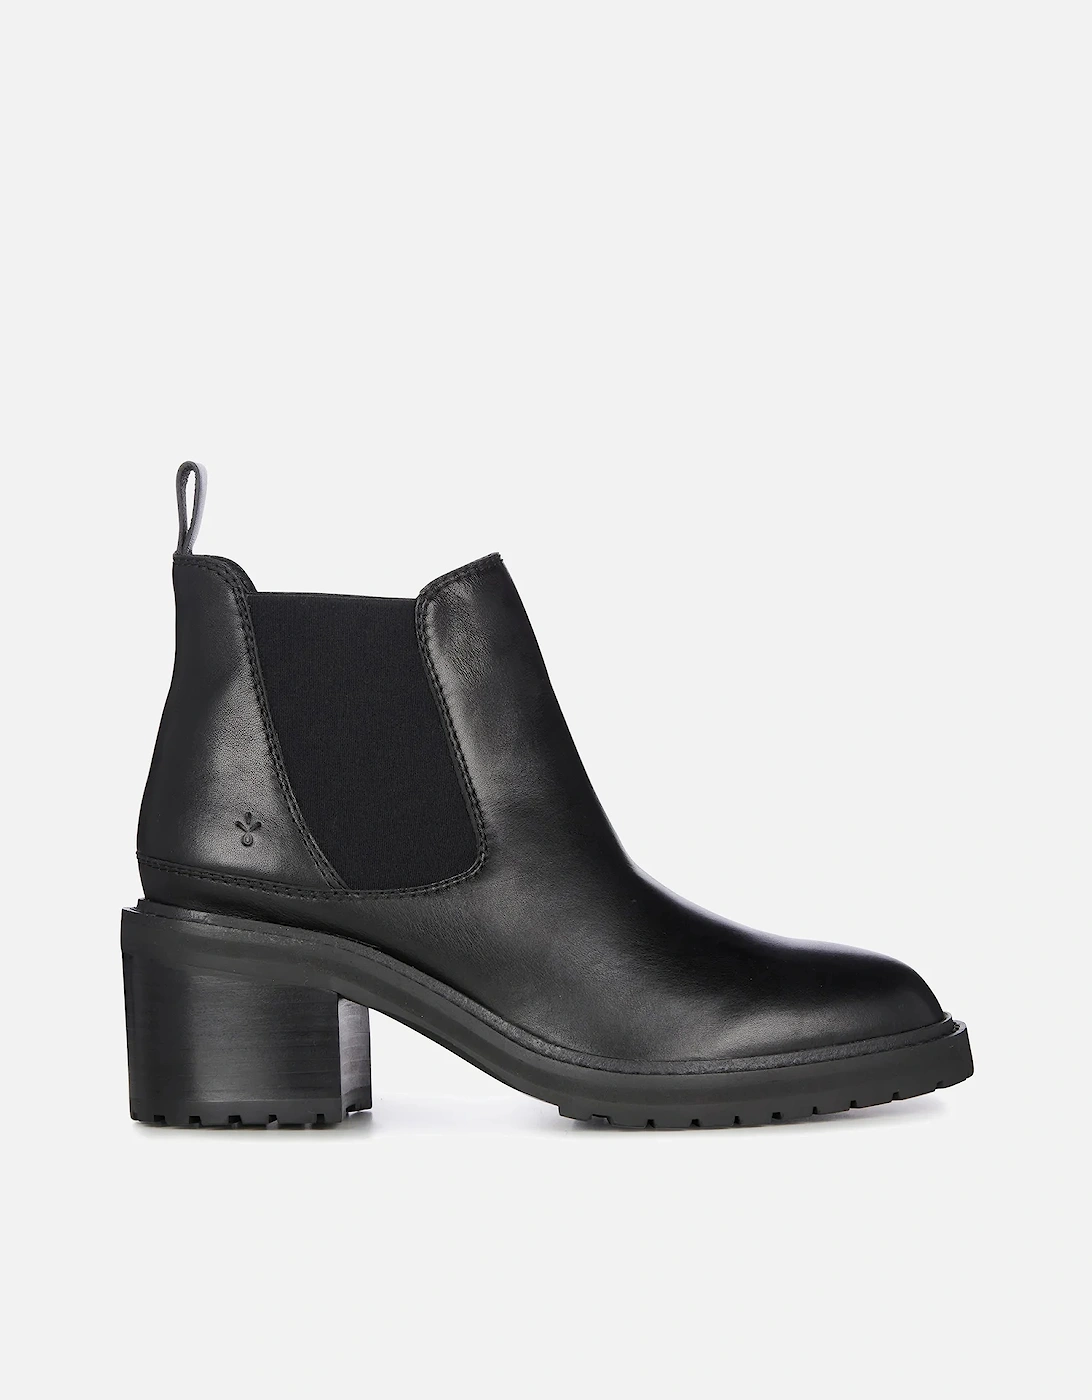 Australia Clare Leather Heeled Chelsea Boots - Australia - Home - Women's Shoes - Women's Boots - Women's Chelsea Boots - Australia Clare Leather Heeled Chelsea Boots